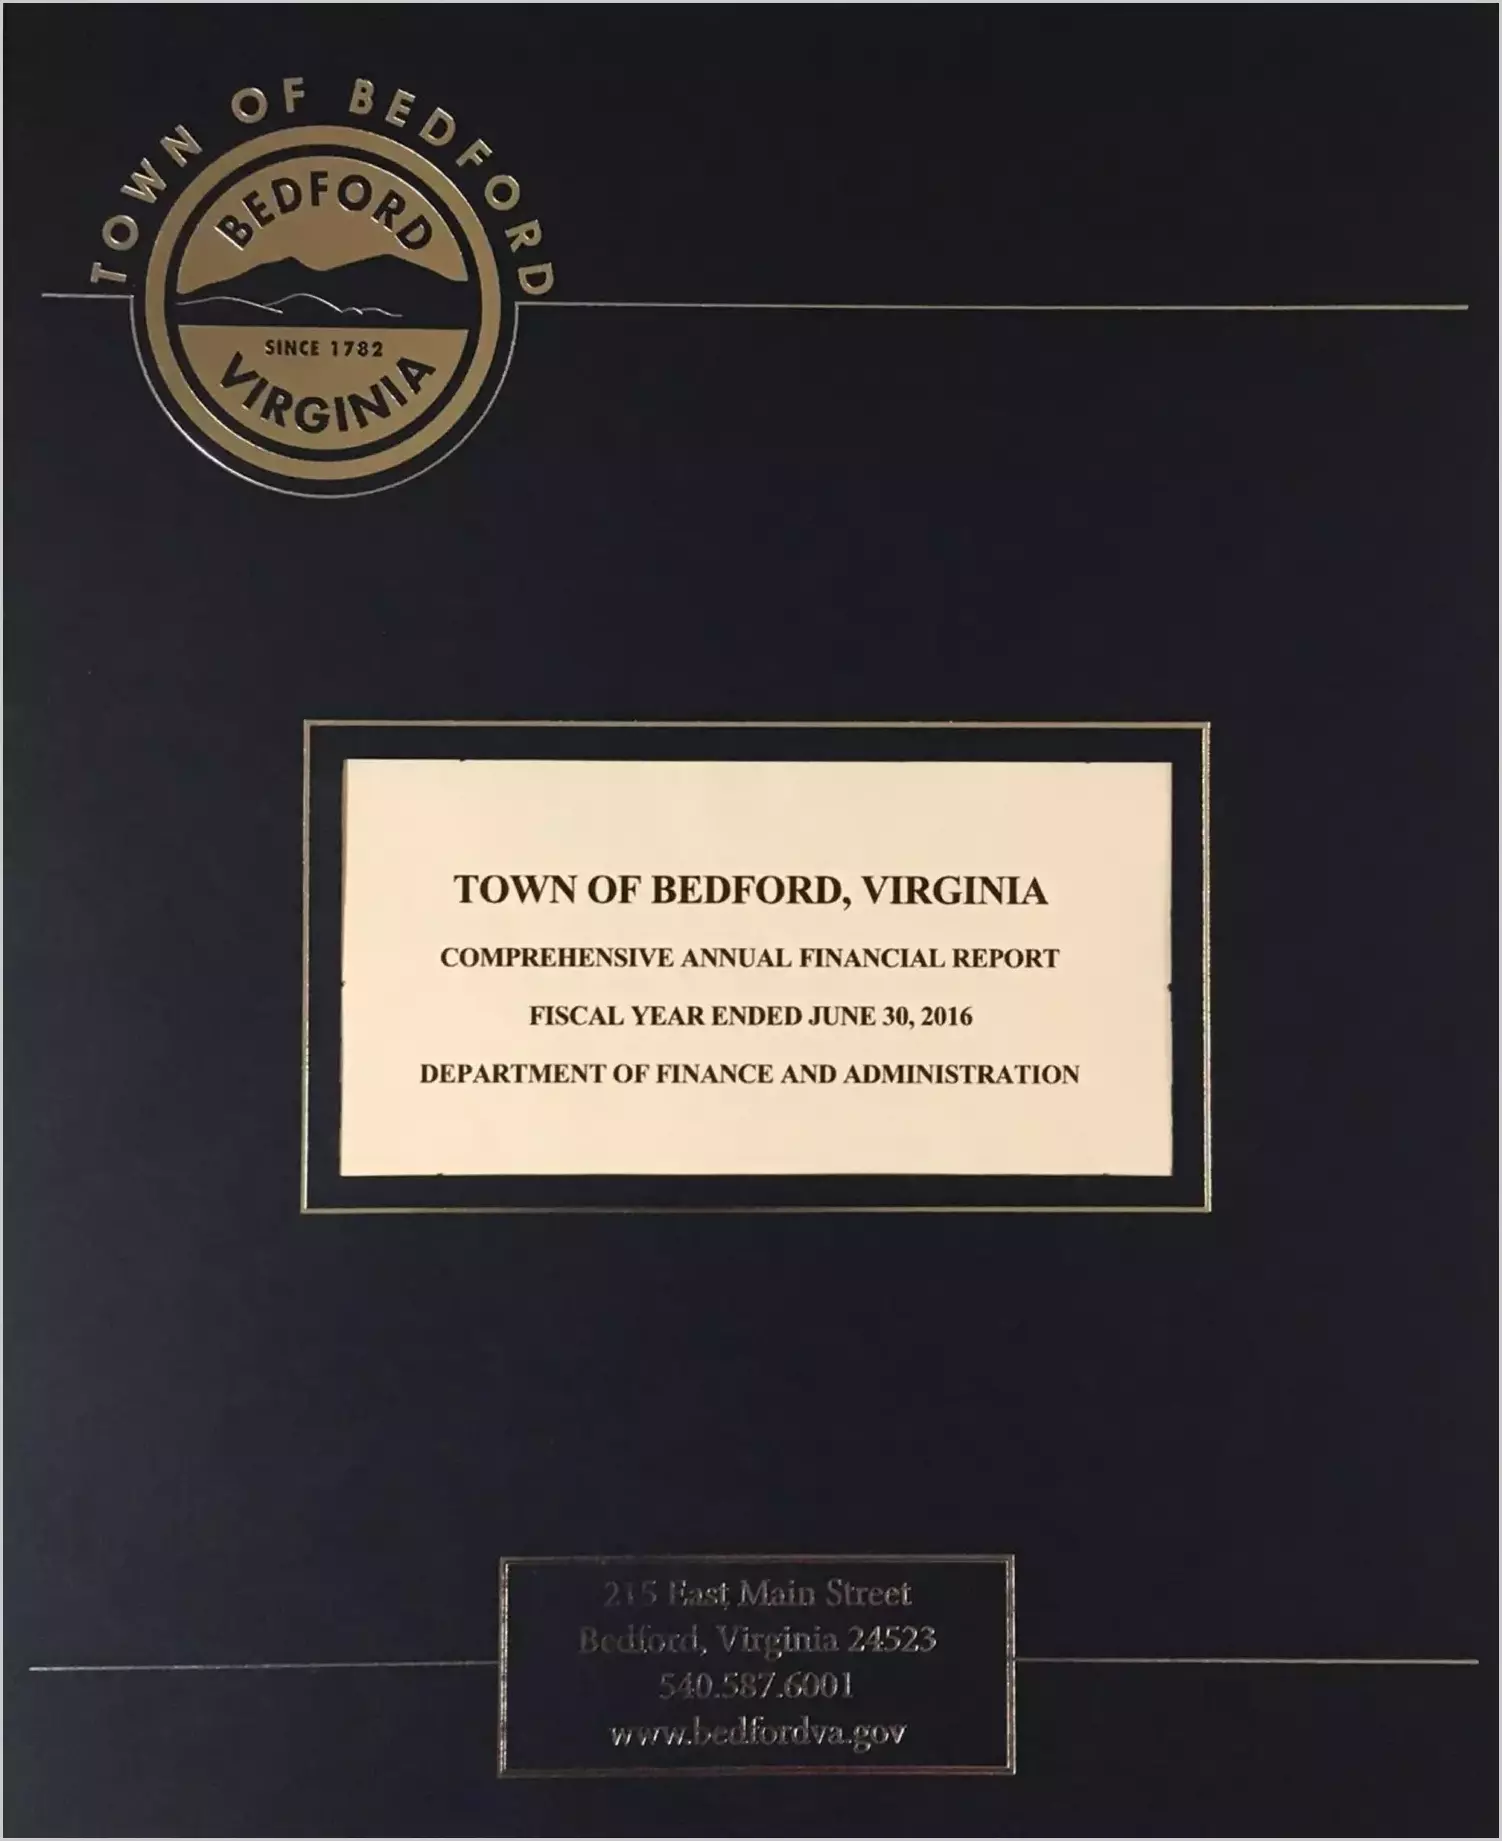 2016 Annual Financial Report for Town of Bedford